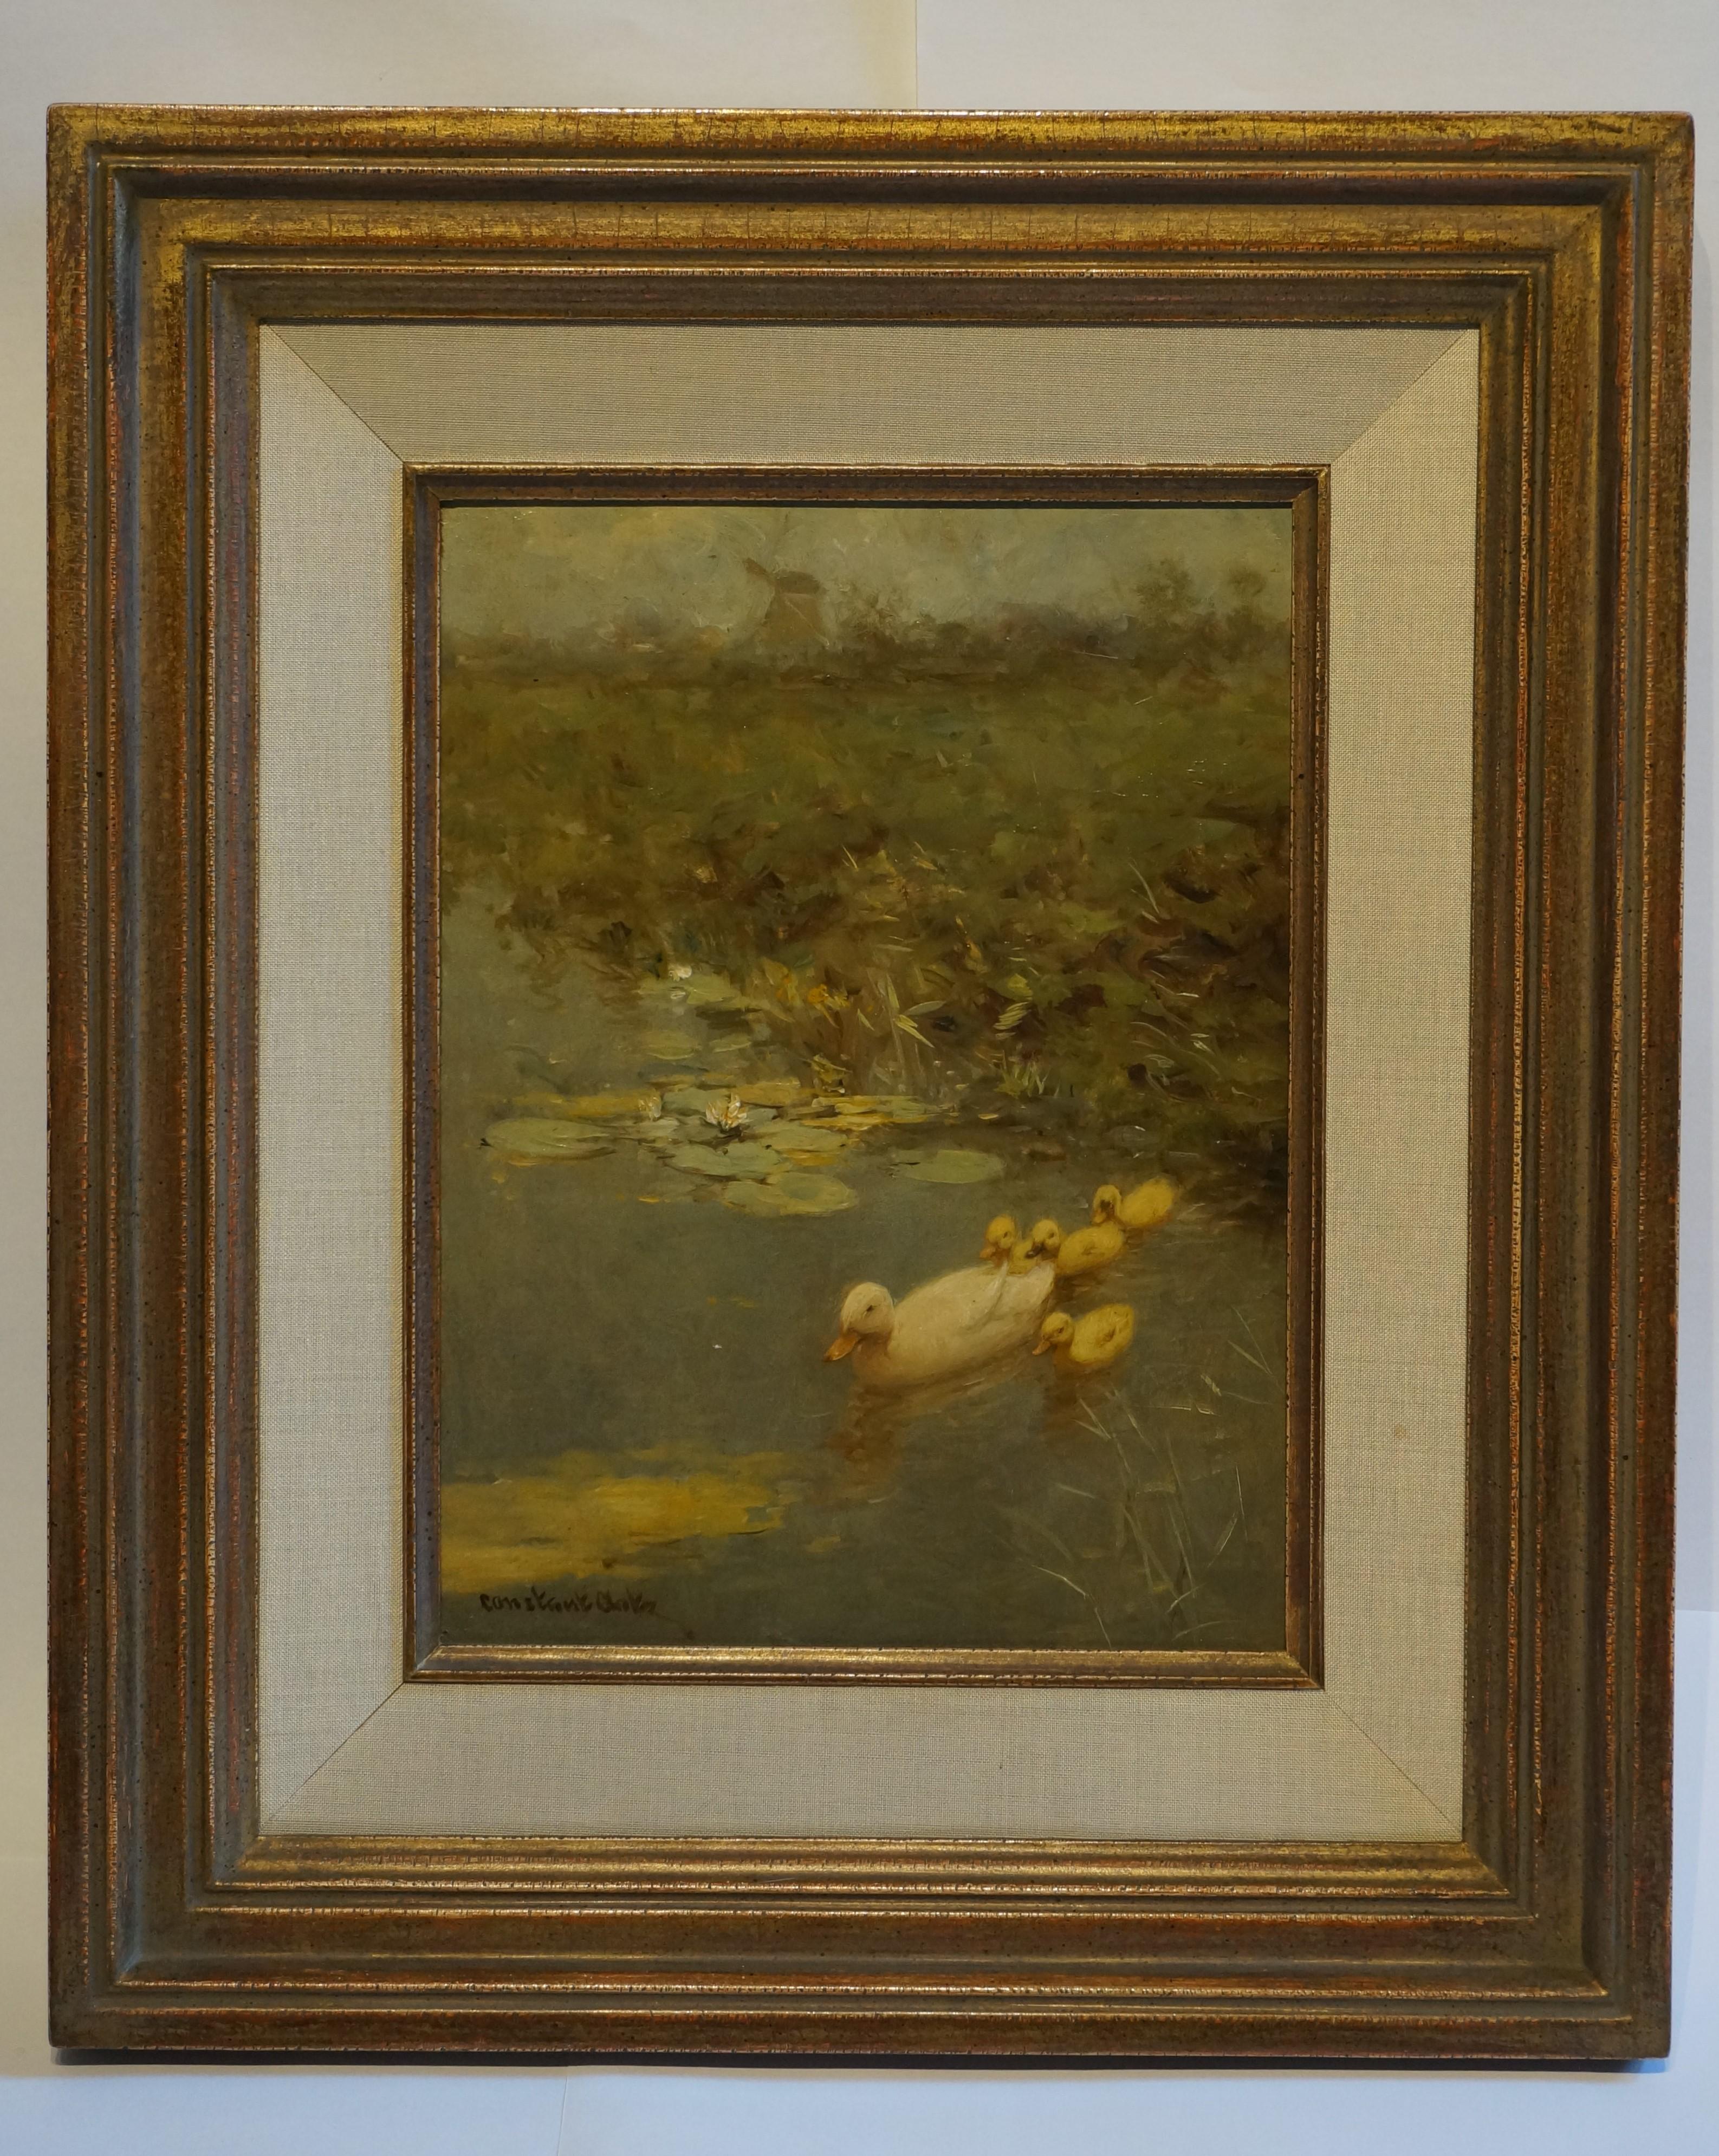 Duck with ducklings - Painting by Constant David Ludovic Artz